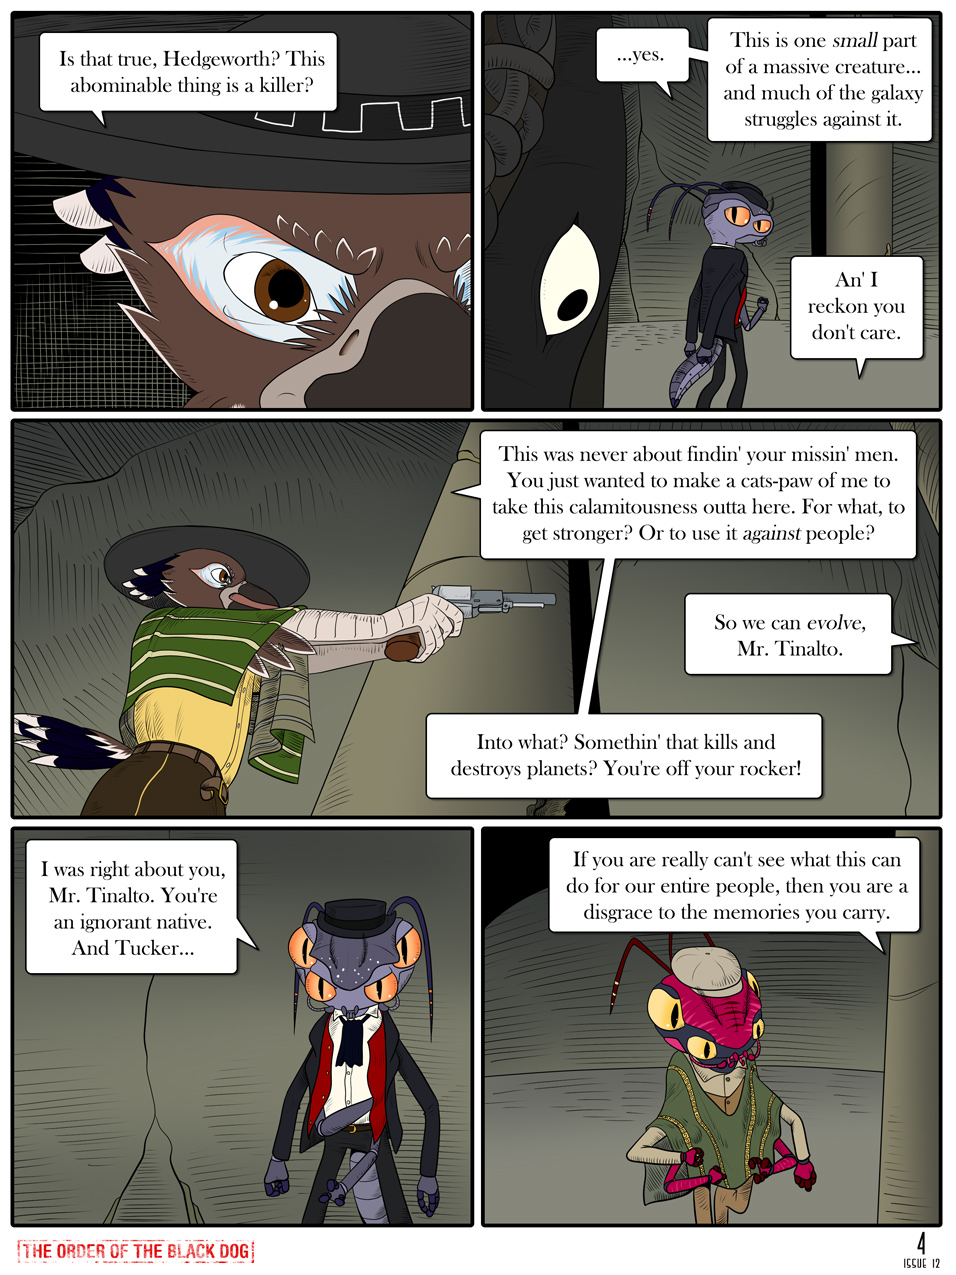 Issue 12, Page 4